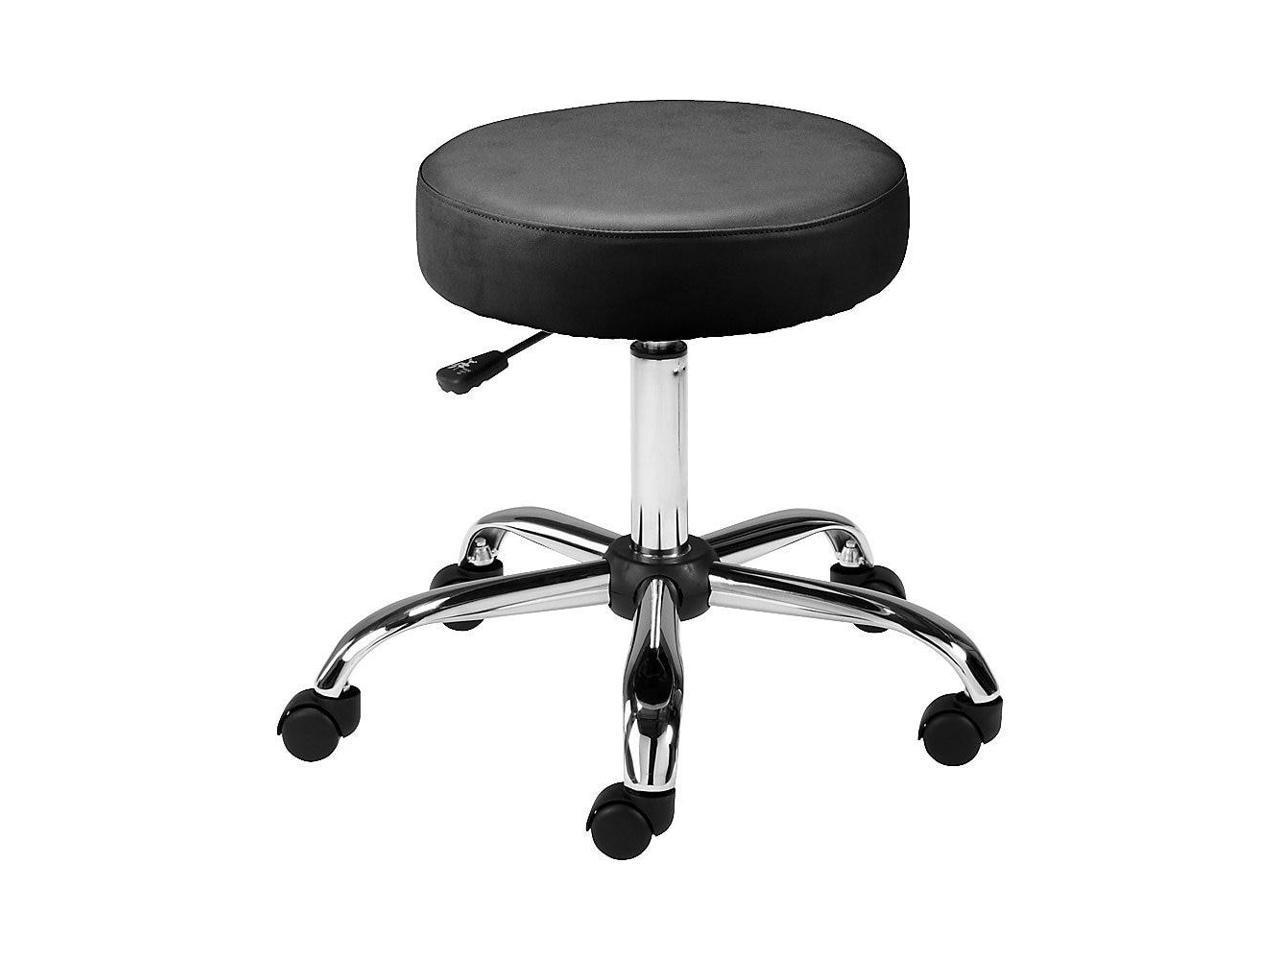 Lorell Pneumatic Height Stool Backless 24"x24"x23" Black 69513 - image 2 of 8